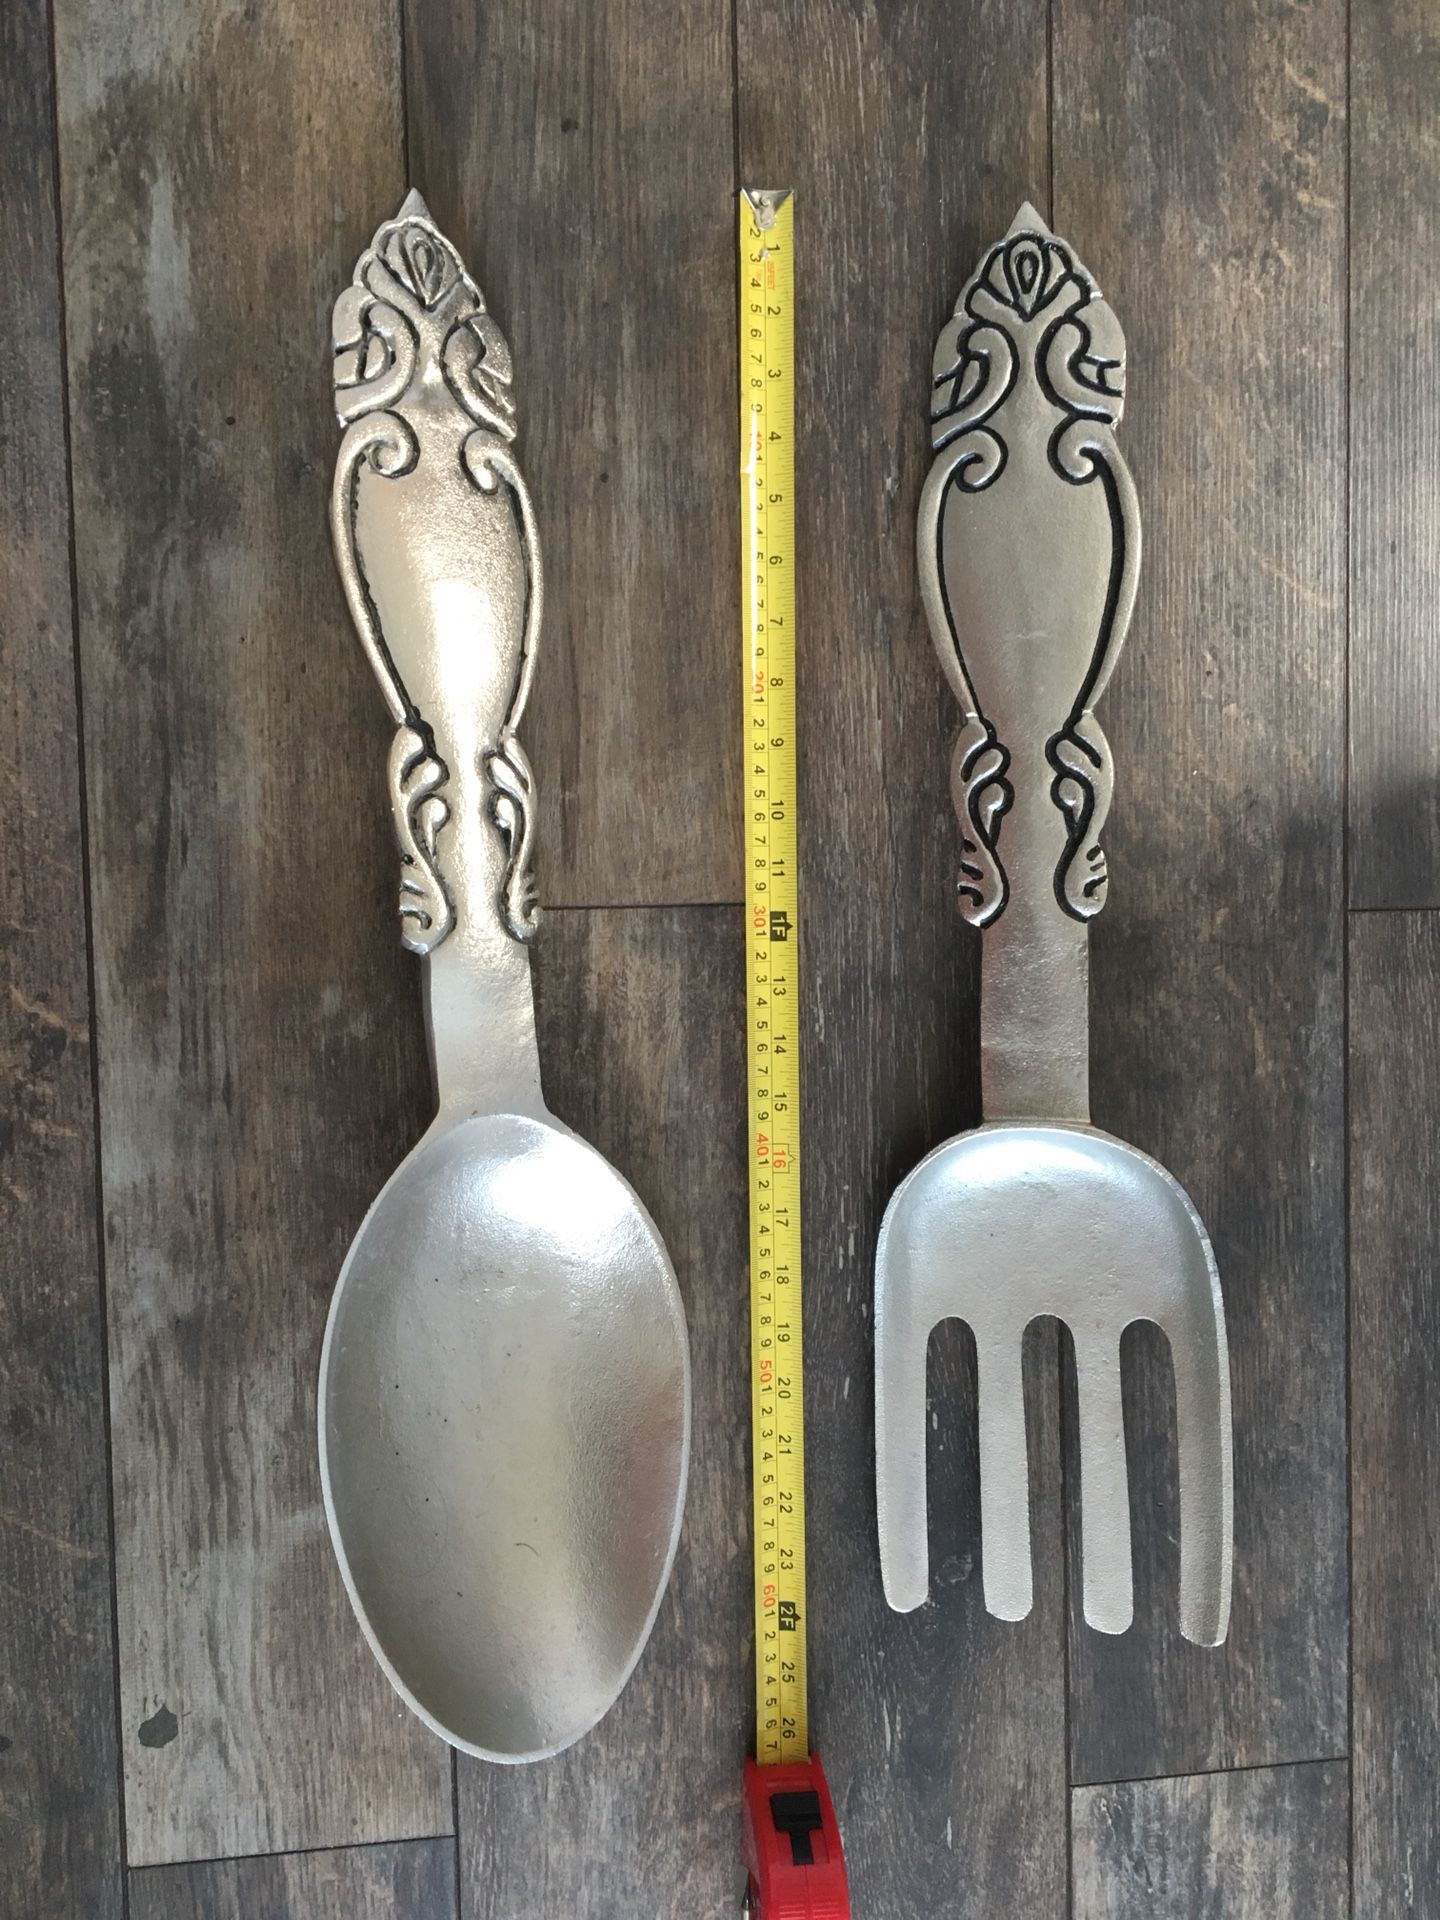 Decorative spoon and fork